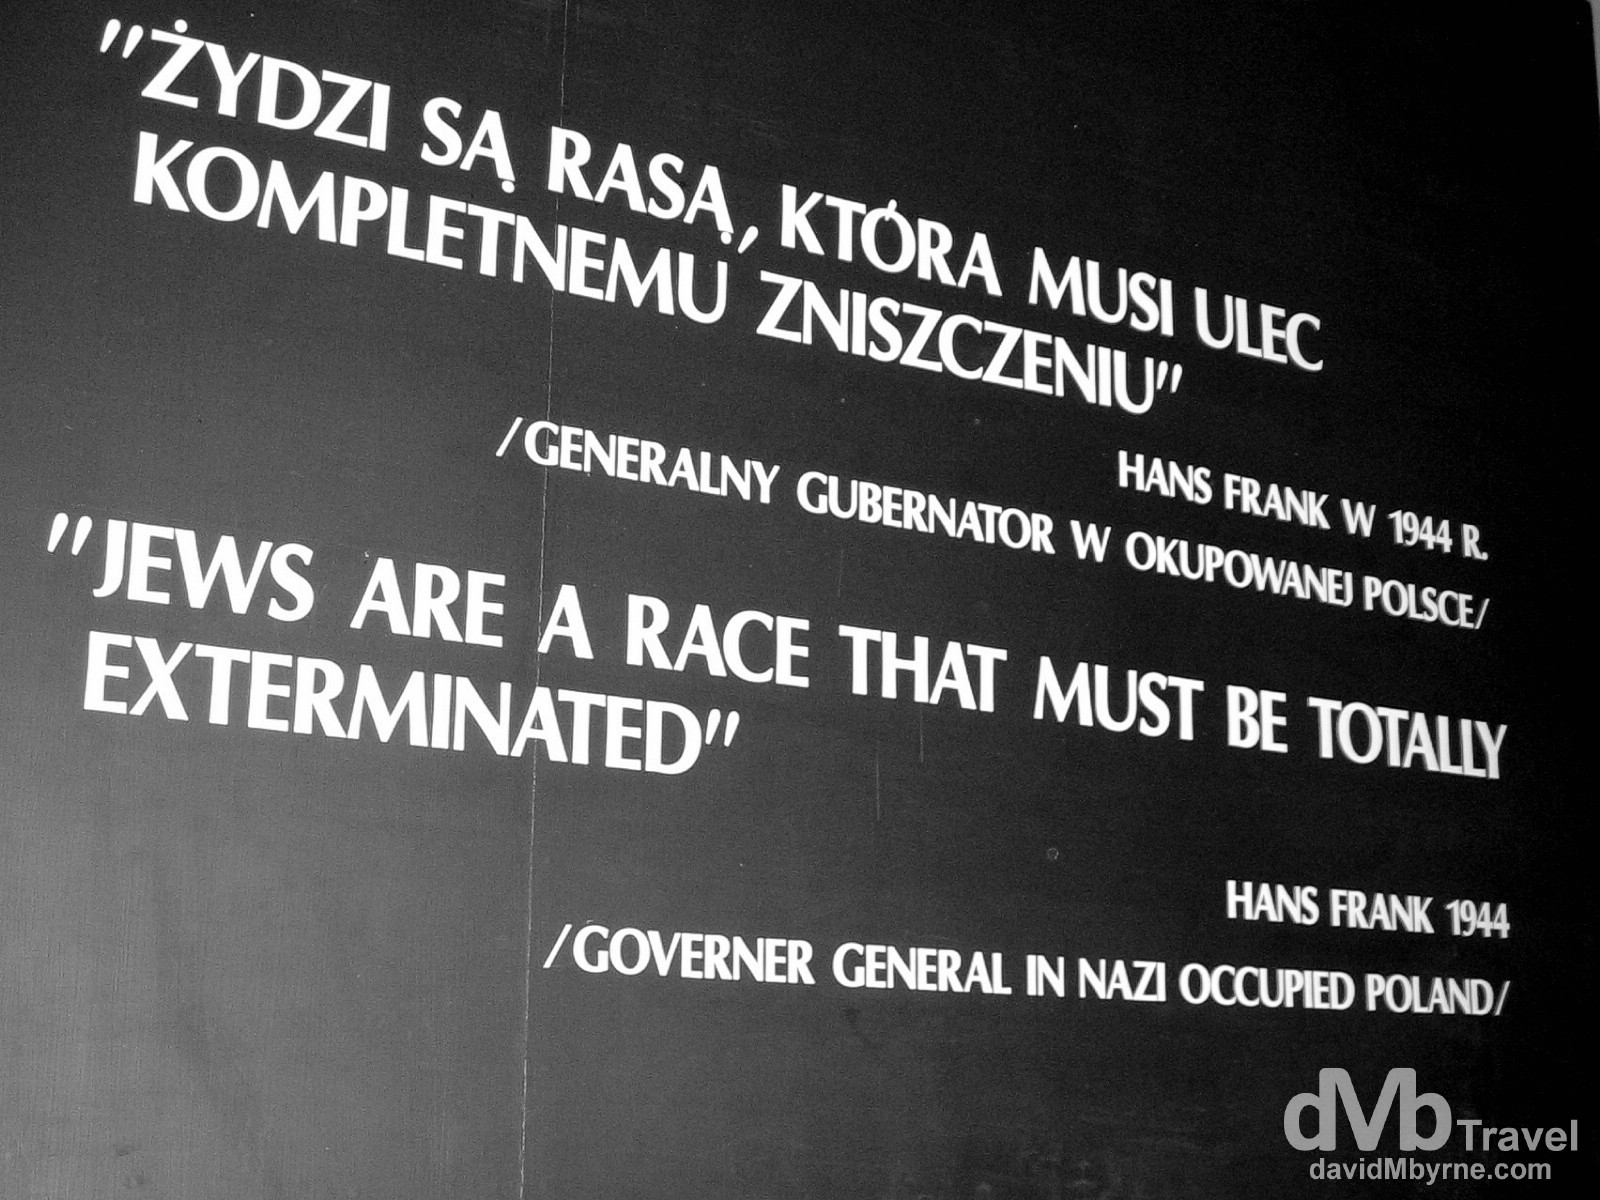 A quote on the walls of one of the buildings of Auschwitz I. The State Museum in O?wi?cim (Auschwitz). O?wi?cim, Poland. March 7, 2006.